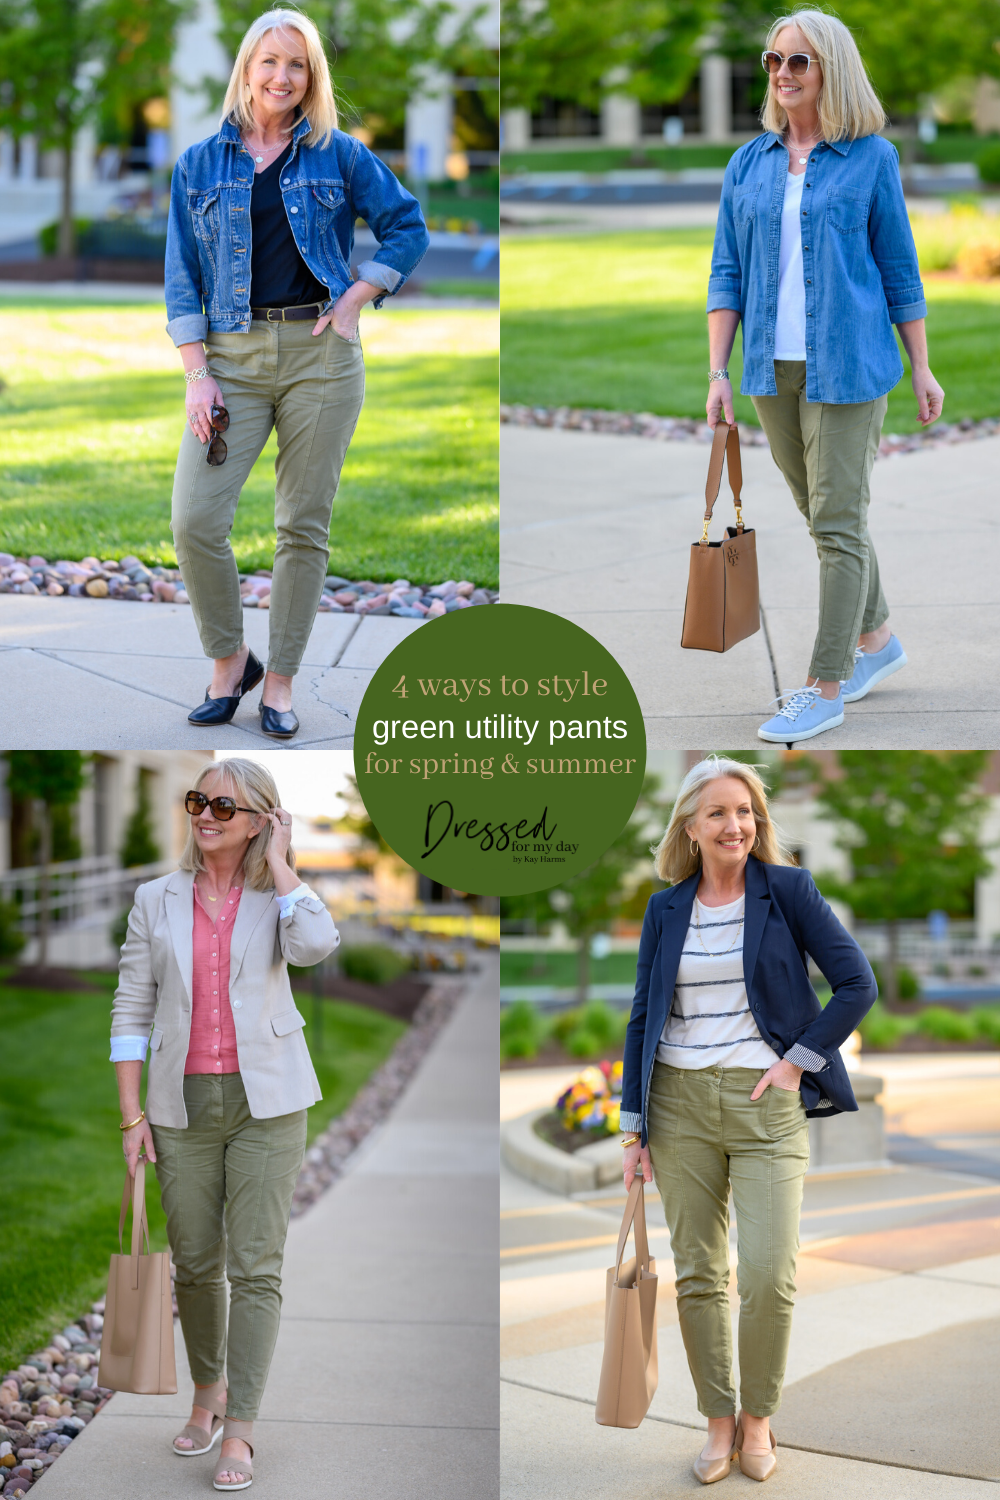 4 ways to style green utility pants